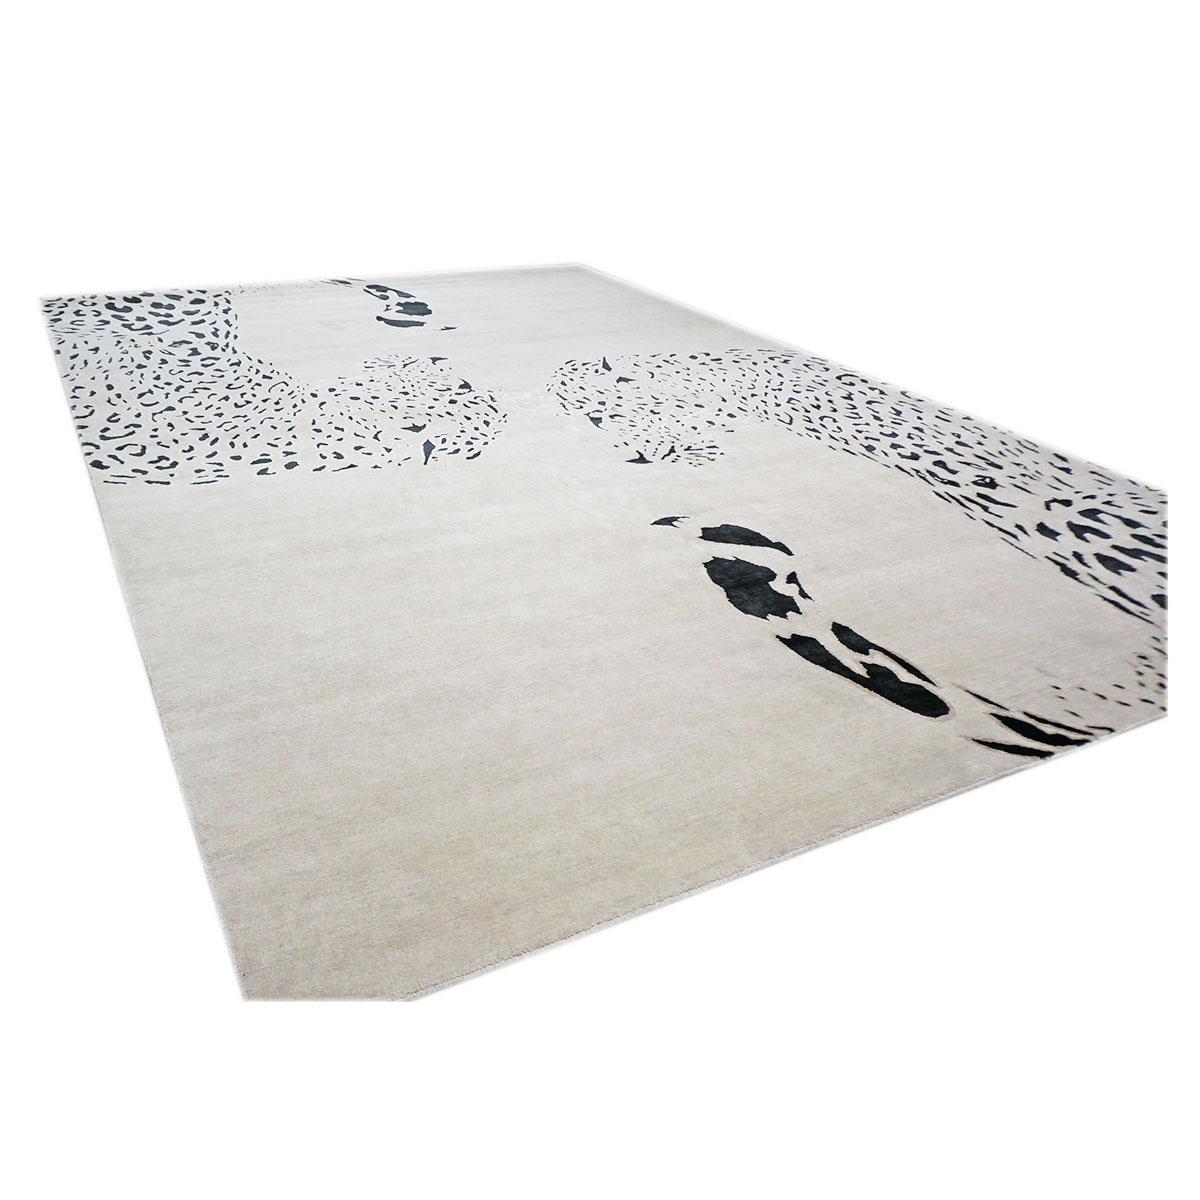 Modern Wool & Silk 9x14 Ivory & Black Jaguar Design Handmade Area Rug In Excellent Condition For Sale In Houston, TX